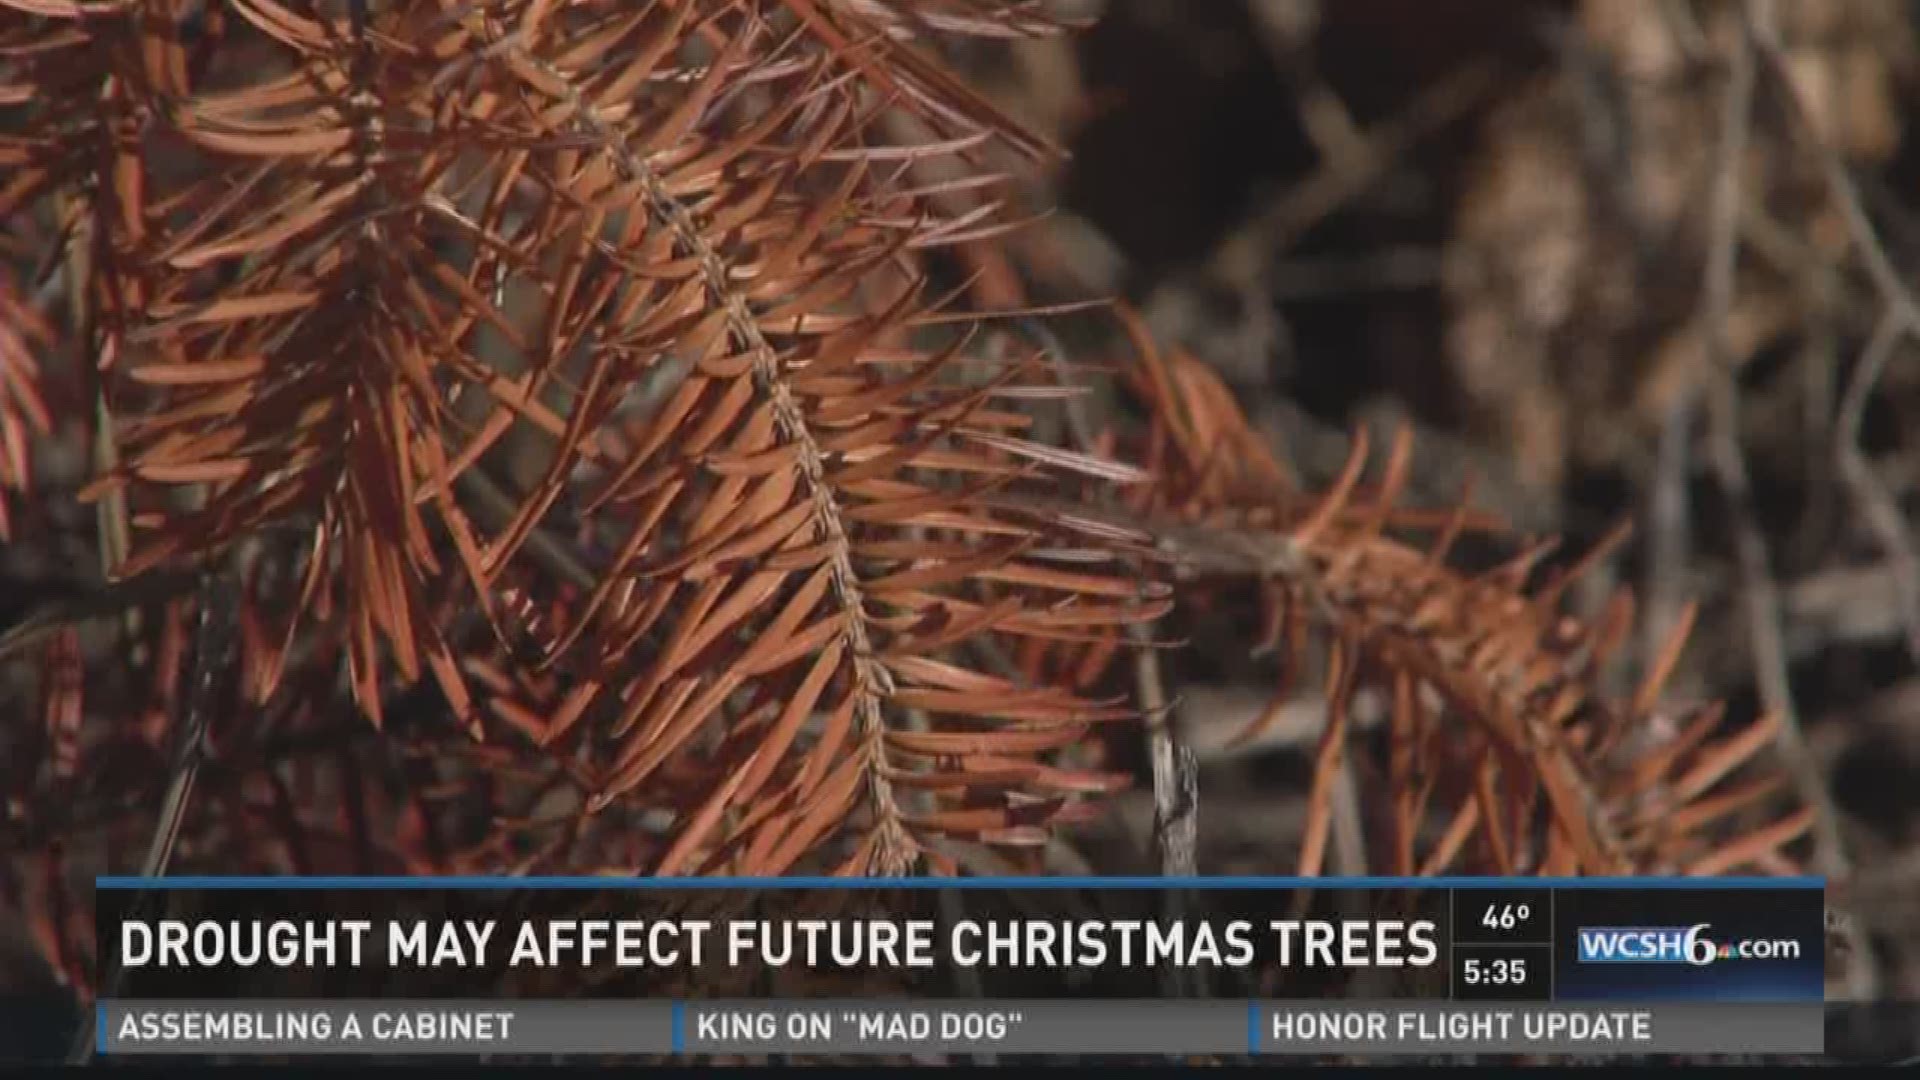 Drought may affect future Christmas trees